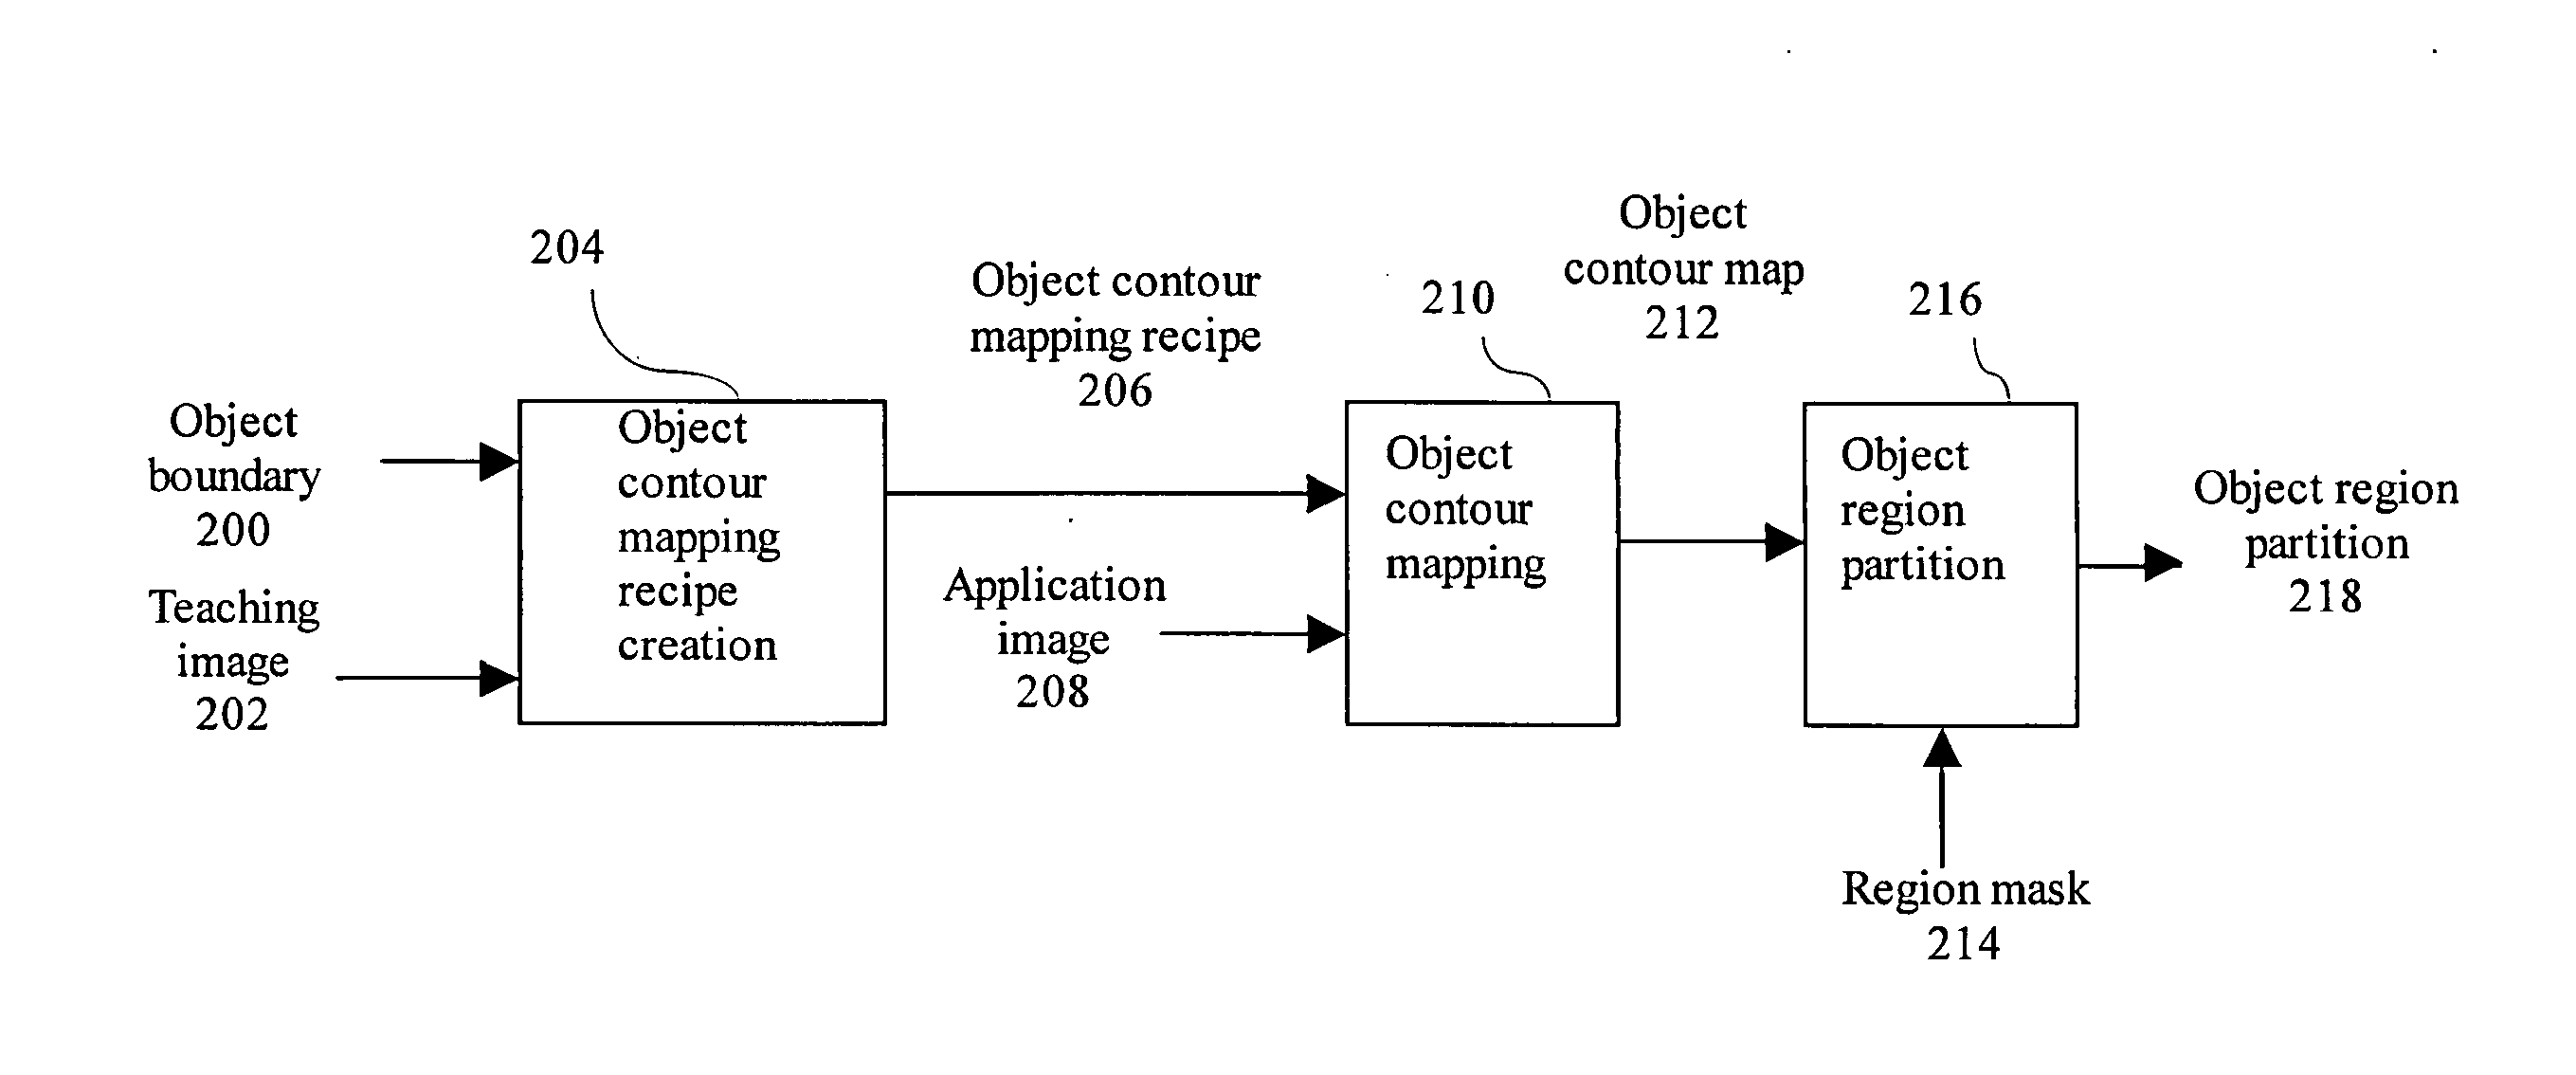 Teachable object contour mapping for biology image region partition